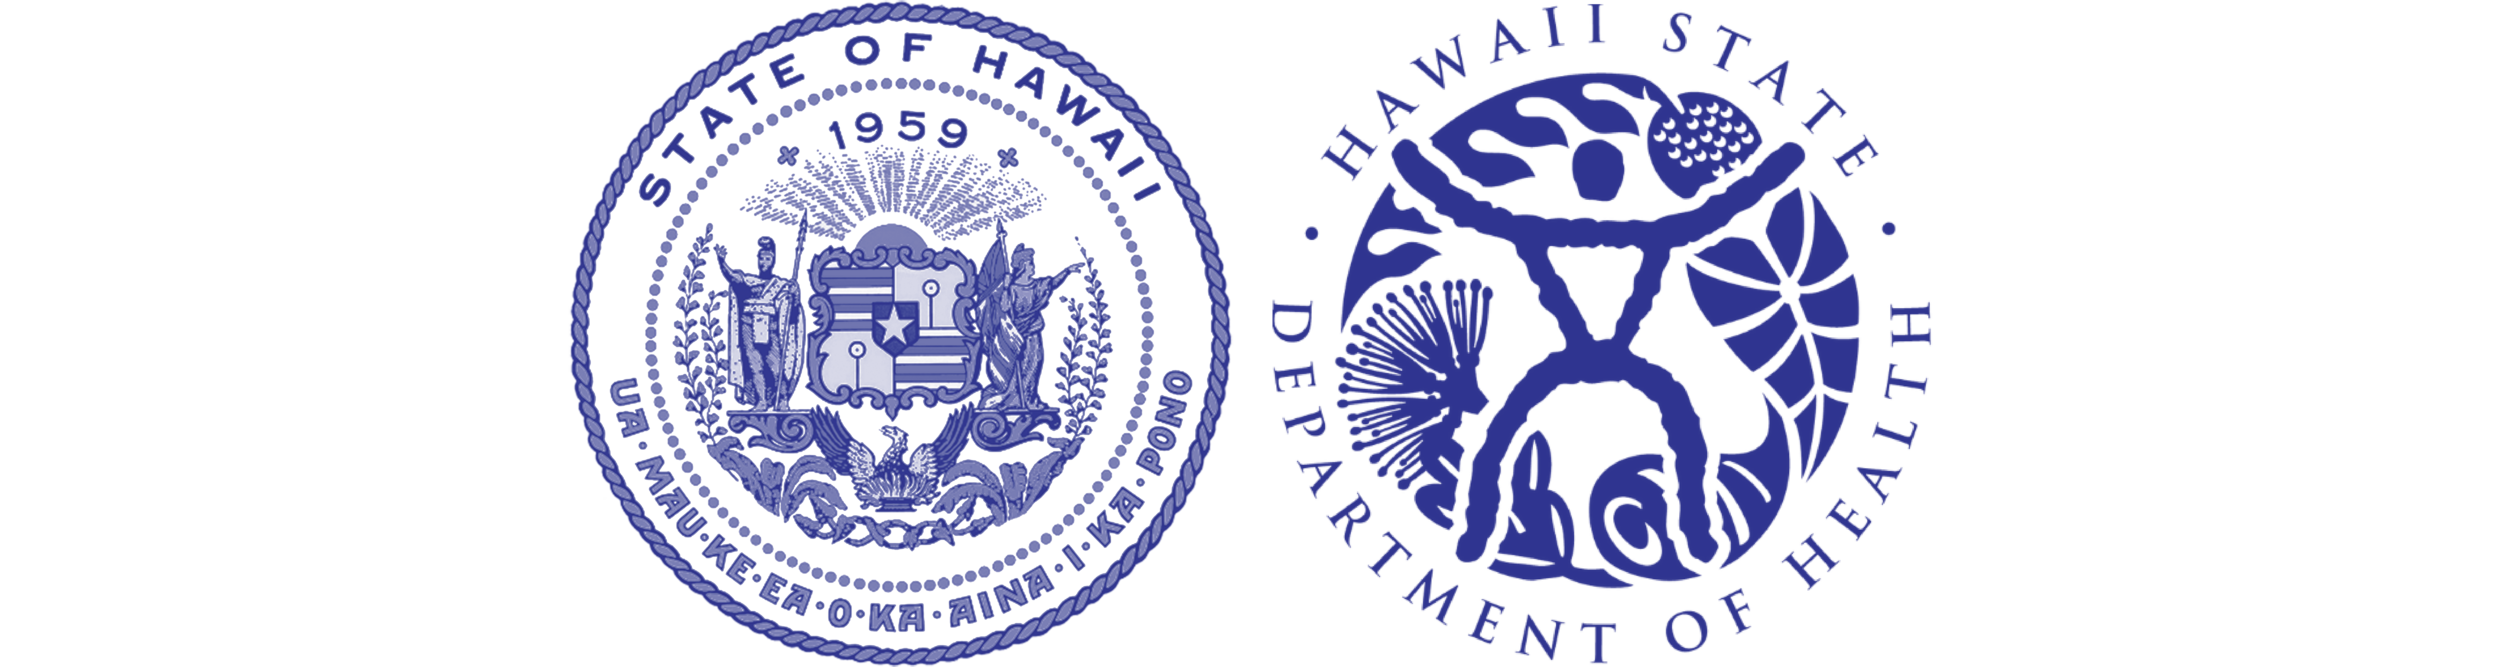 HPHA-resources-logo-State-Hawaii-DOH.png